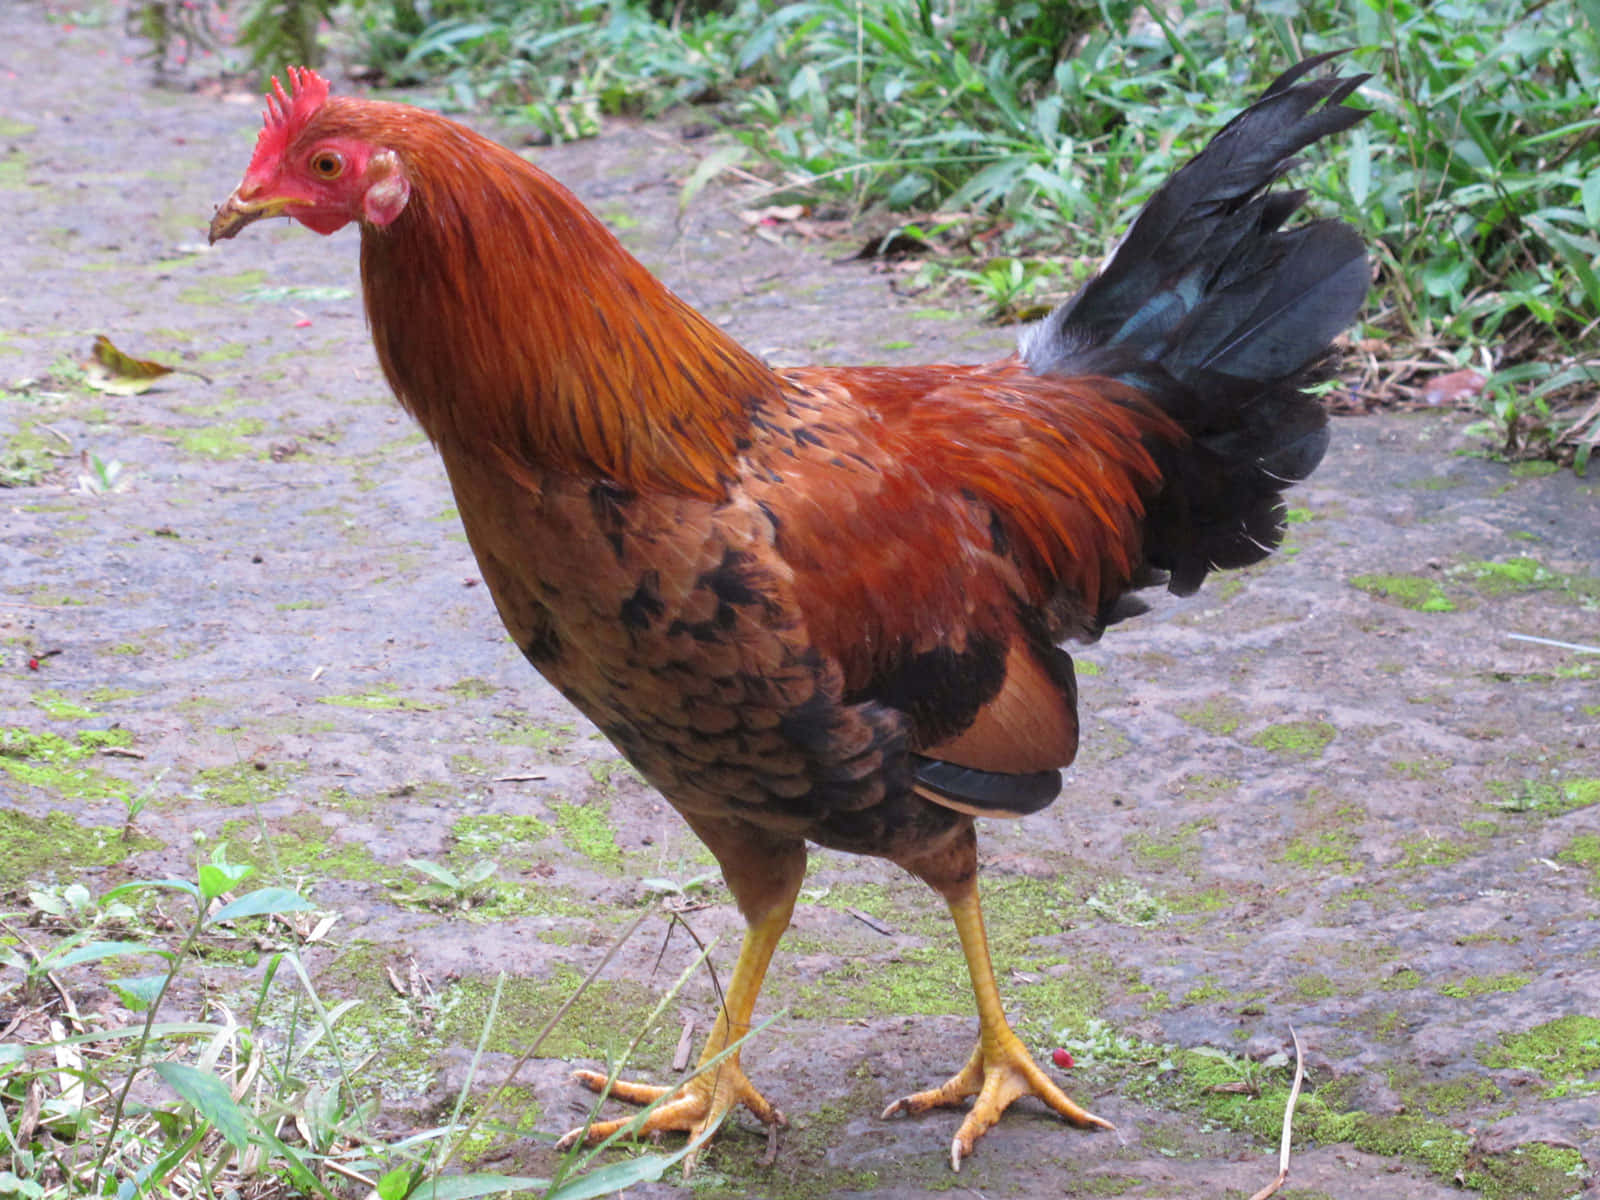 A Rooster Walking On A Path